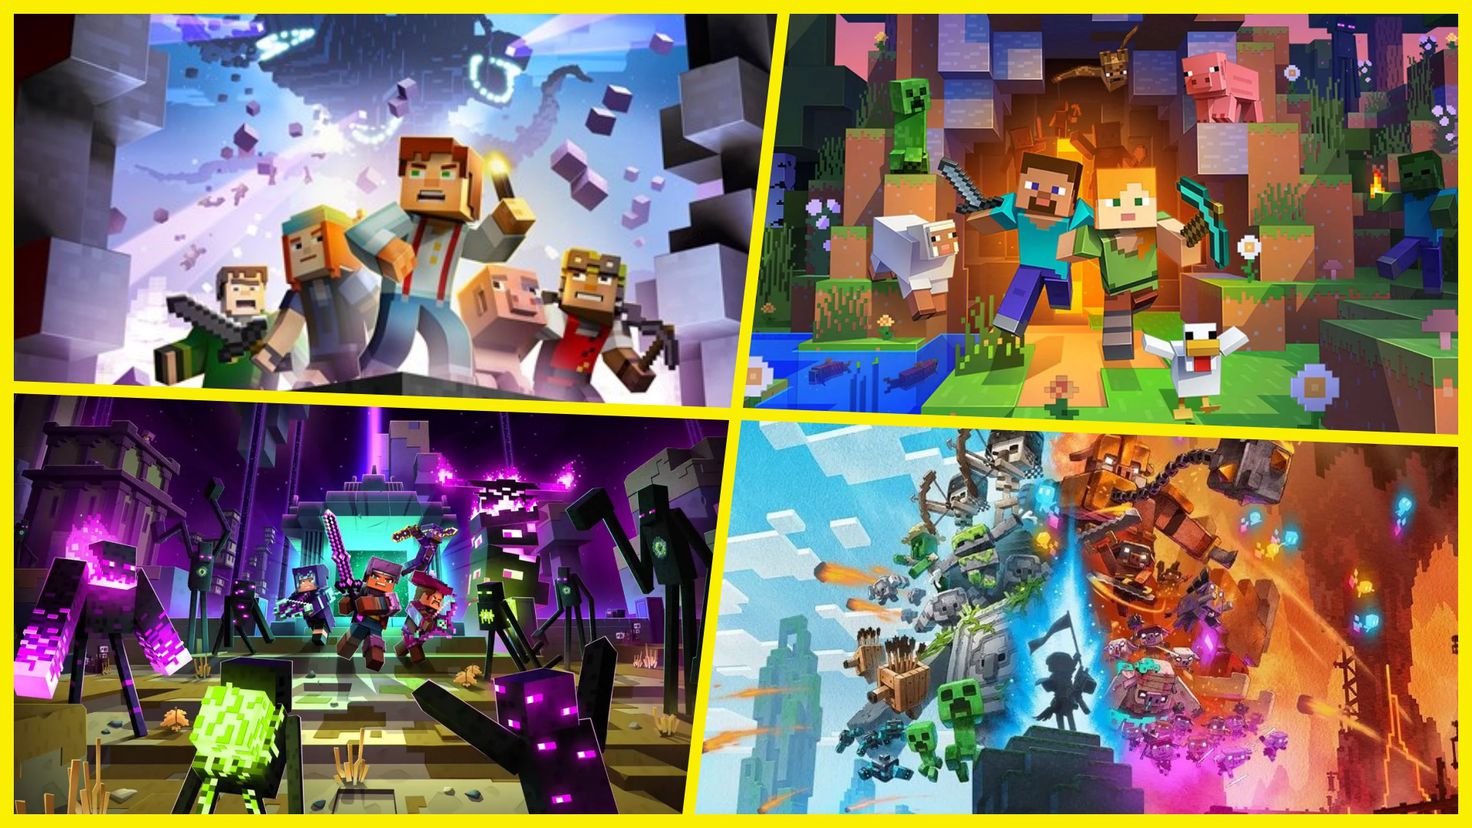 Every Minecraft game in chronological order - Meristation